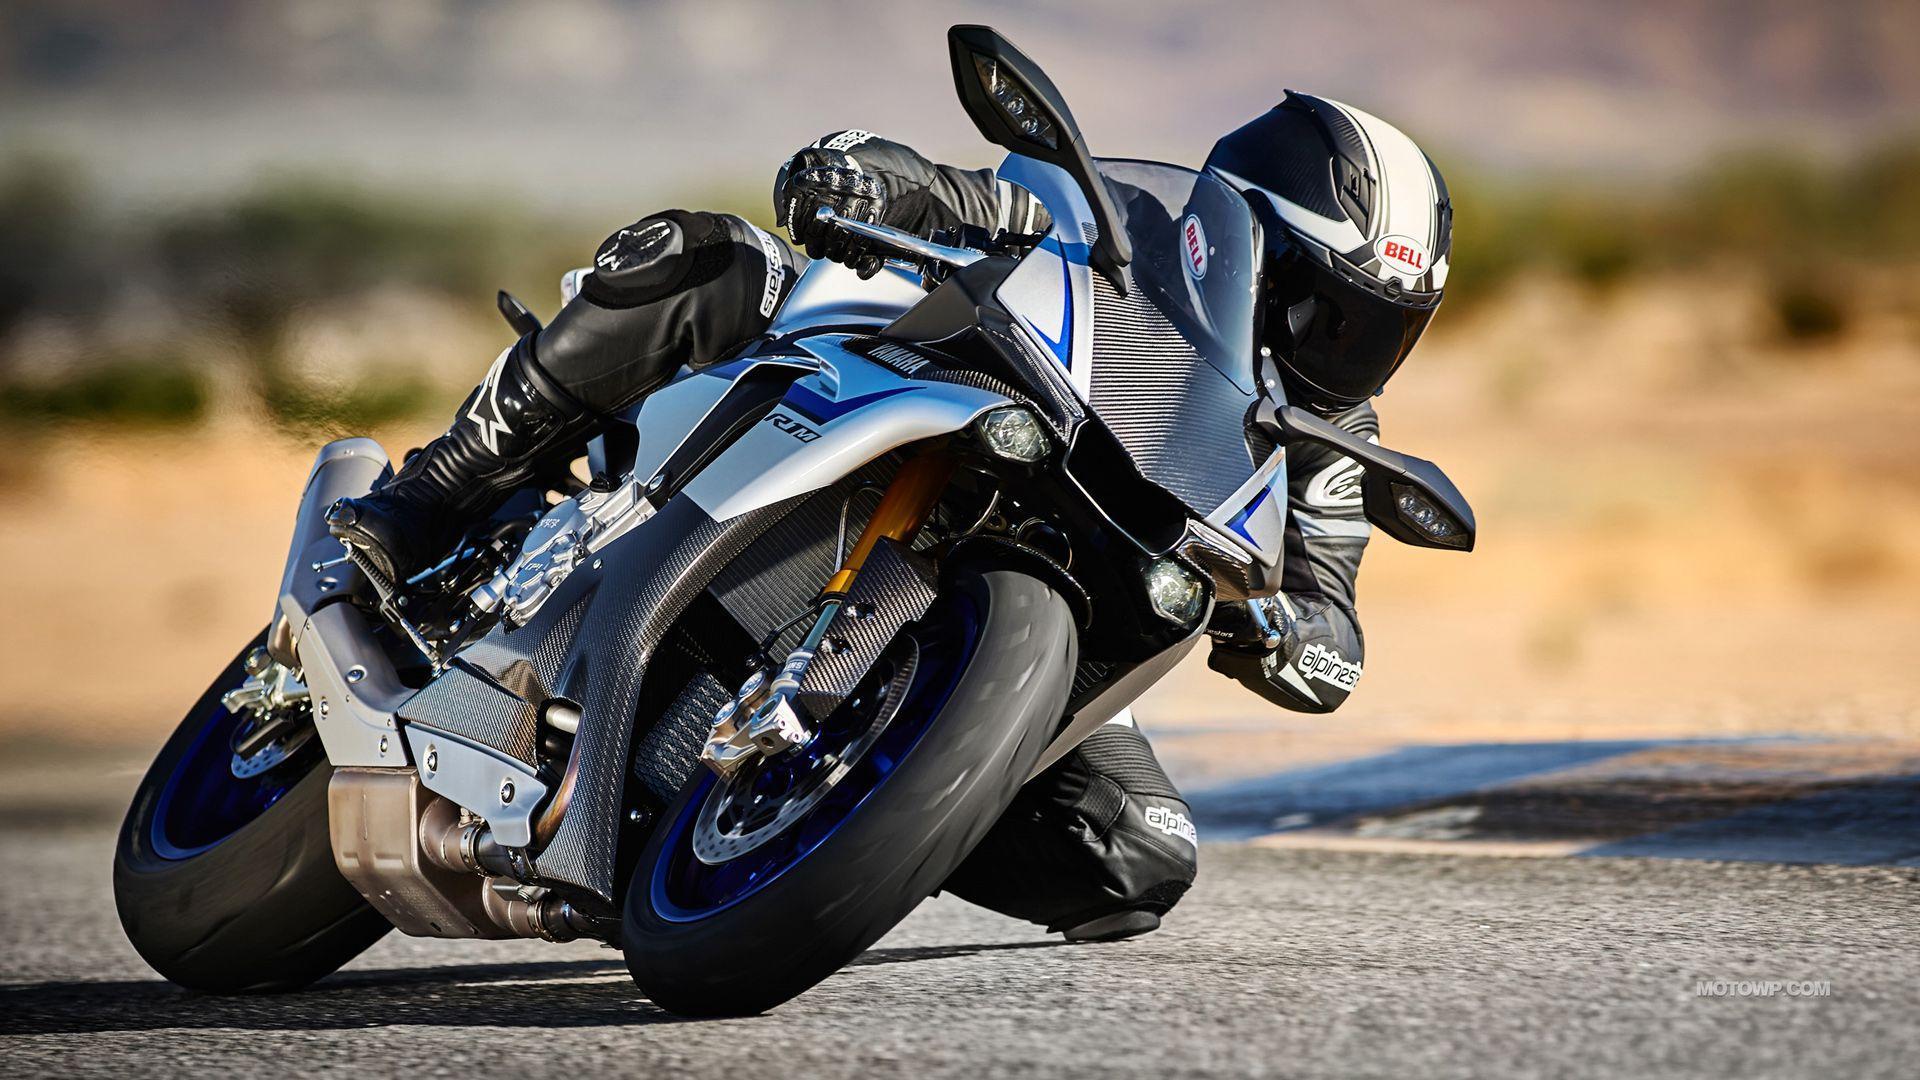 Yamaha YZF-R1M Wallpapers - Wallpaper Cave